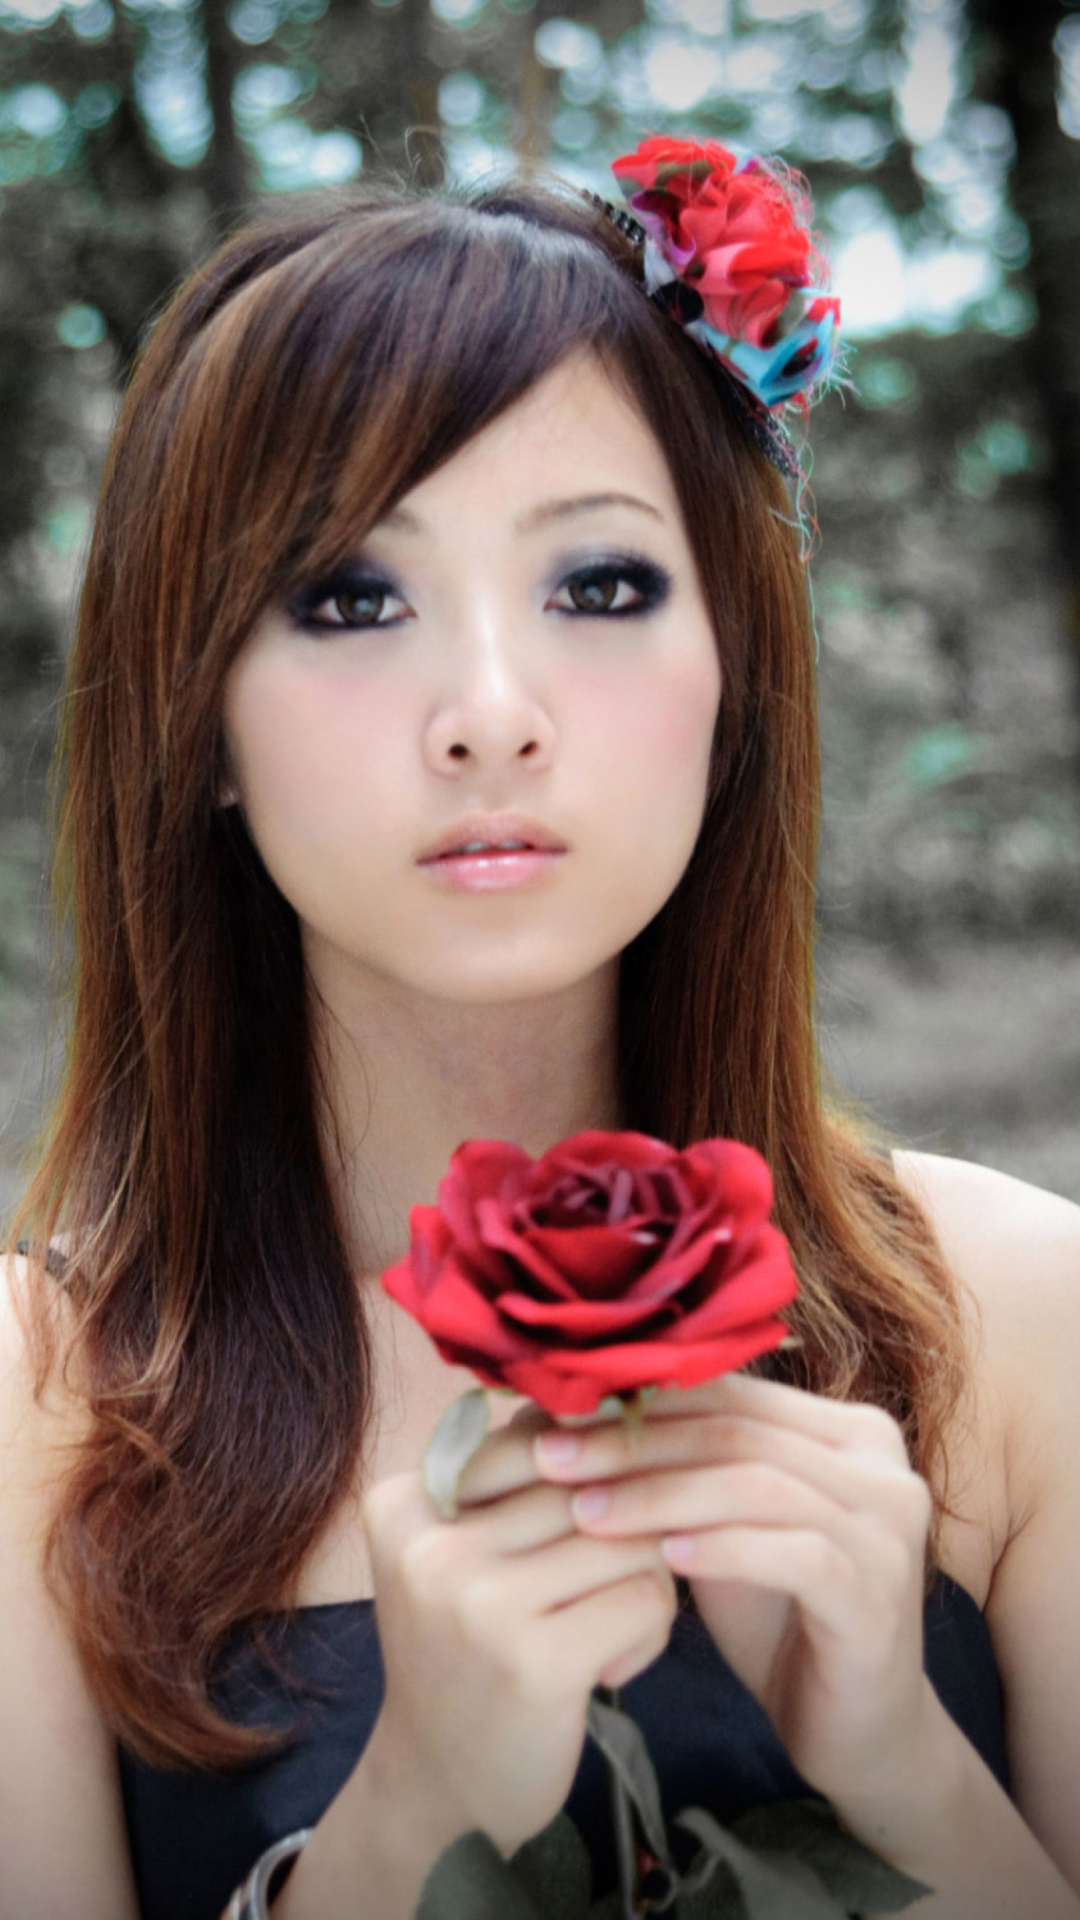 Asian Girl With Red Rose wallpaper 1080x1920